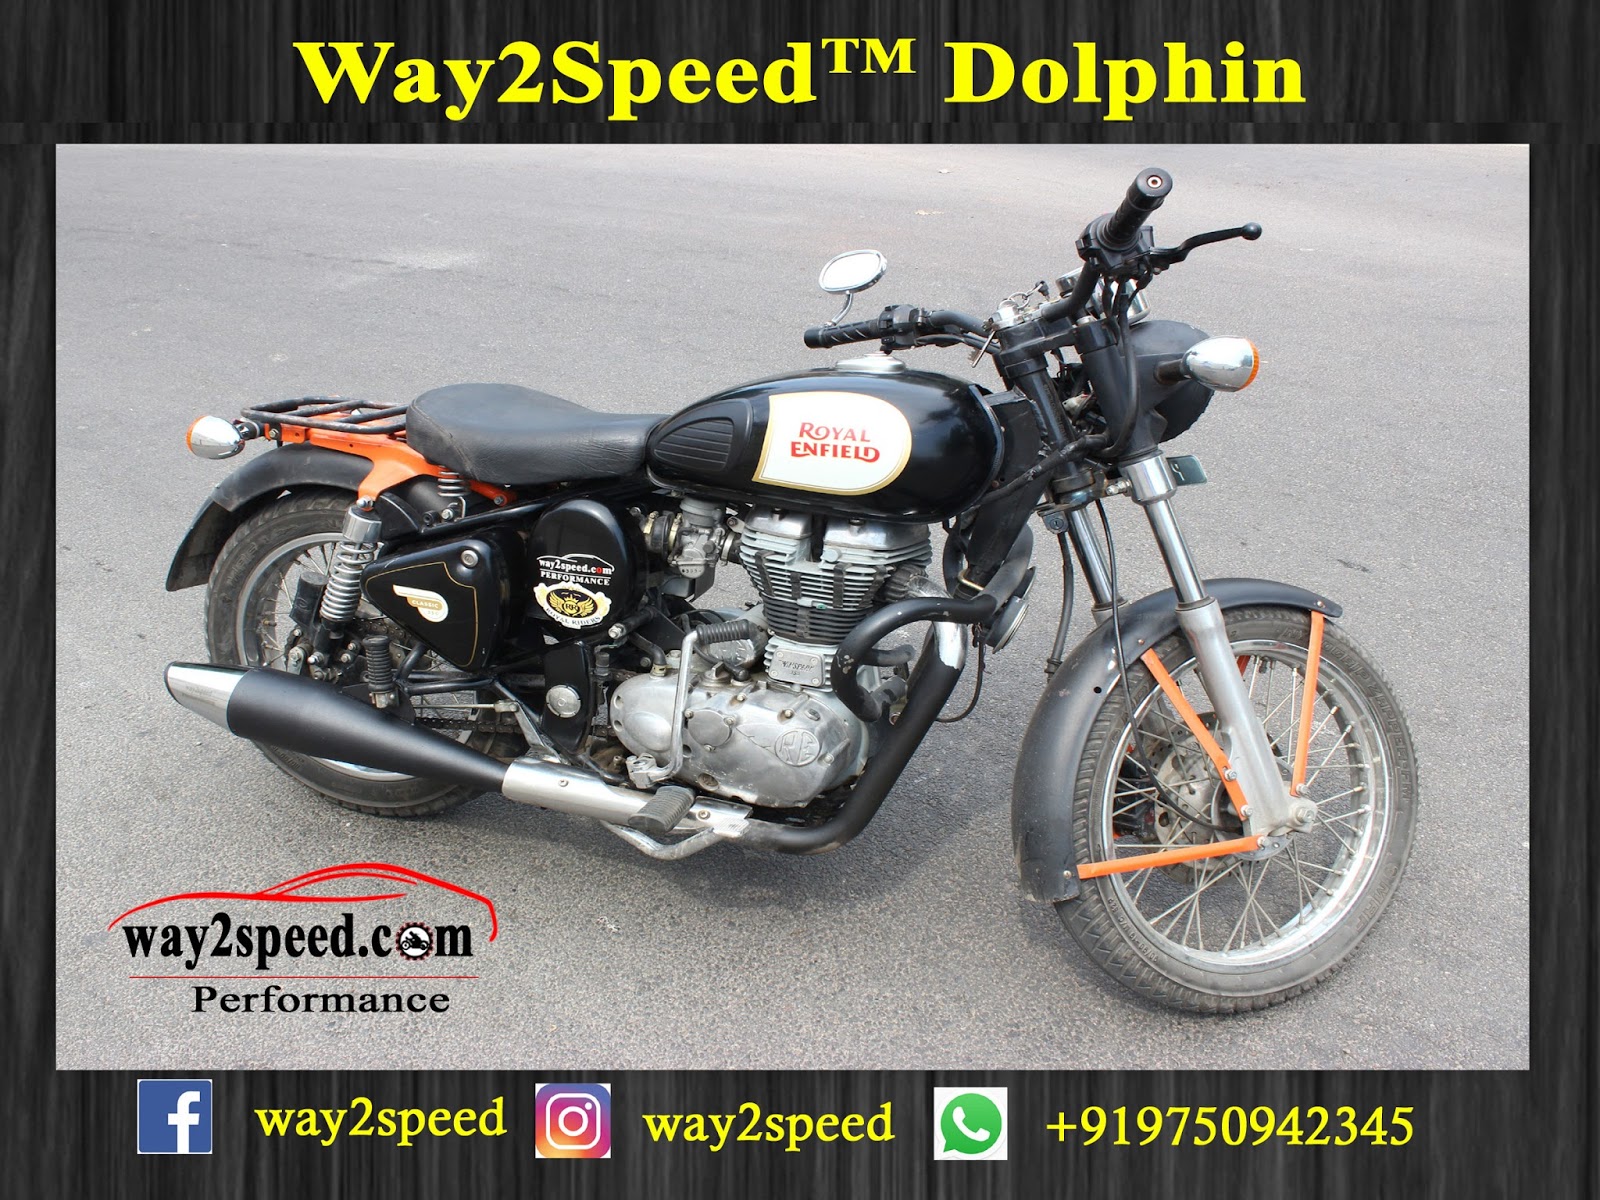 Royal Enfield Dolphin Silencer | Way2speed Performance | Dolphin silencer review | Dolphin silencer for thunderbird 350 | shark silencer royal enfield | Dolphin silencer price | Dolphin silencer sound | Dolphin silencer black | Dolphin exhaust review